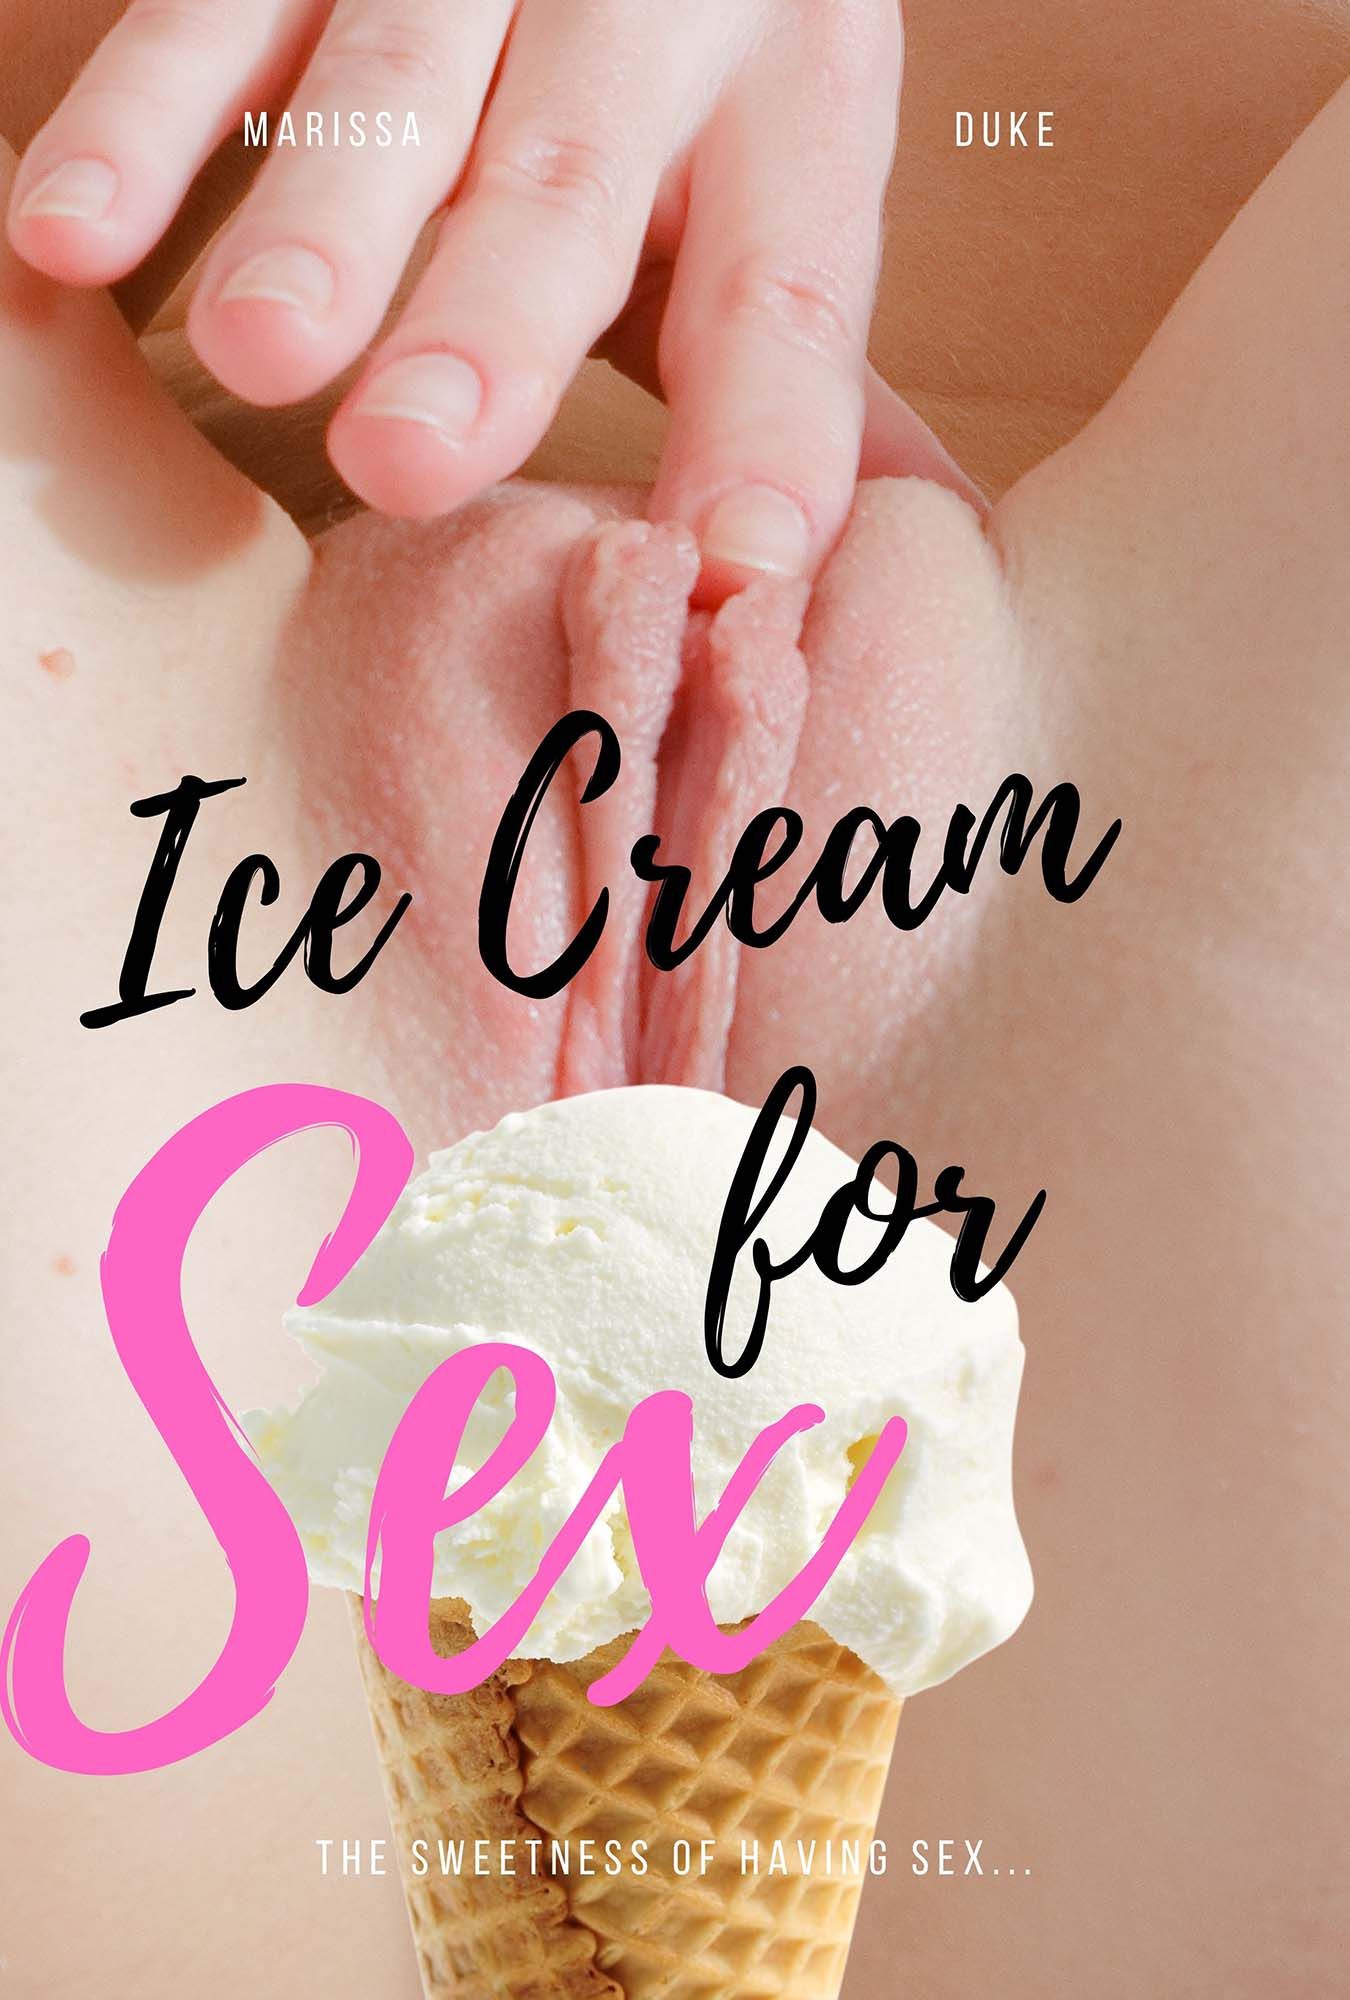 Ice cream for sex,the sweetness of having sexual intercourse